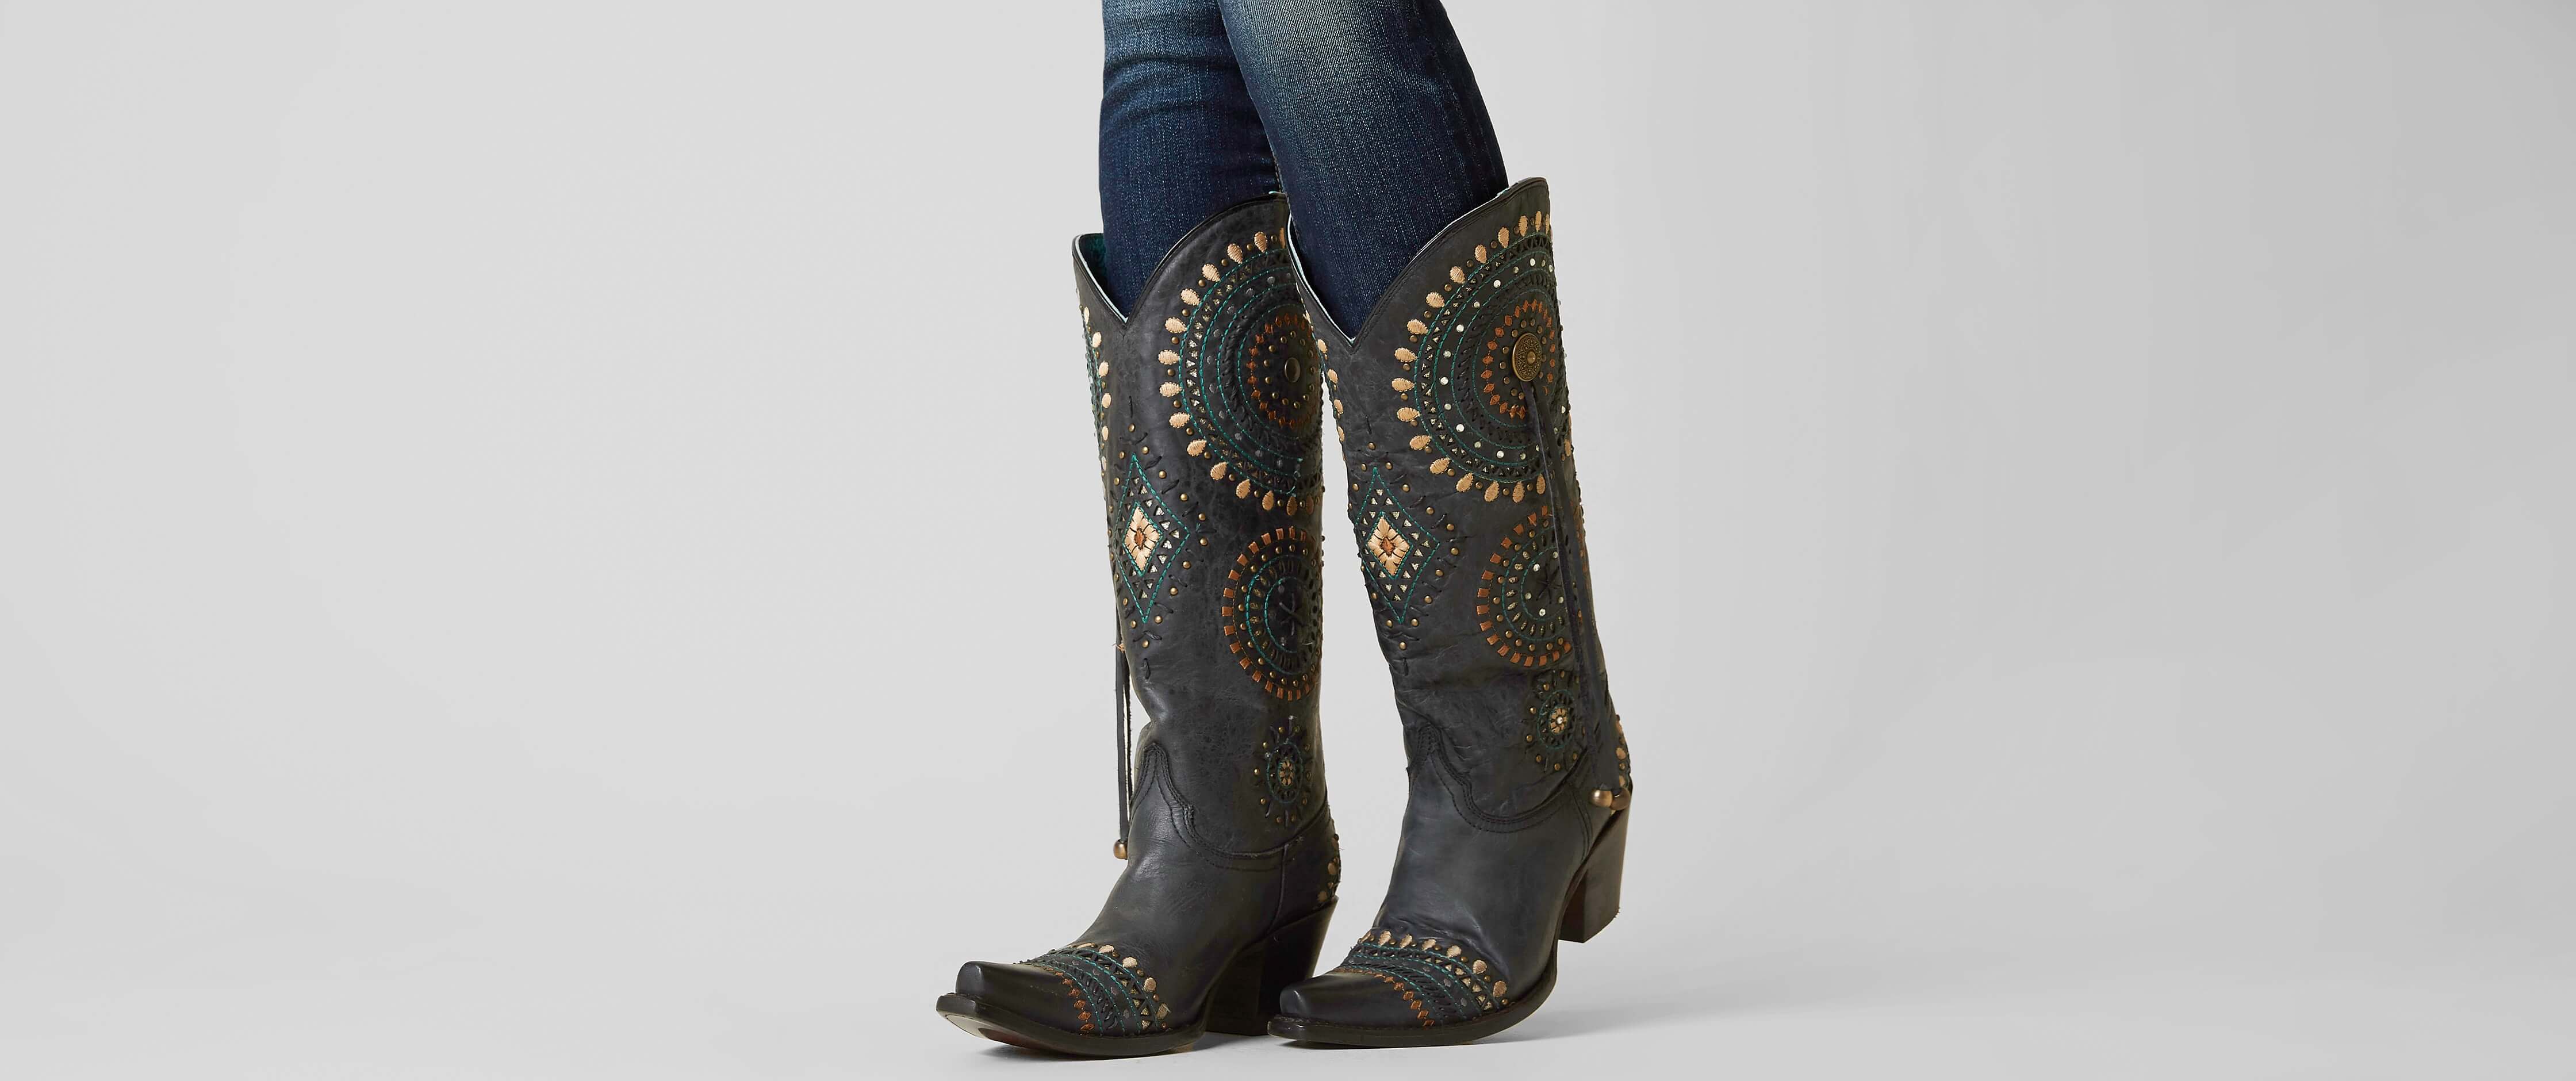 corral embroidered leather western boot